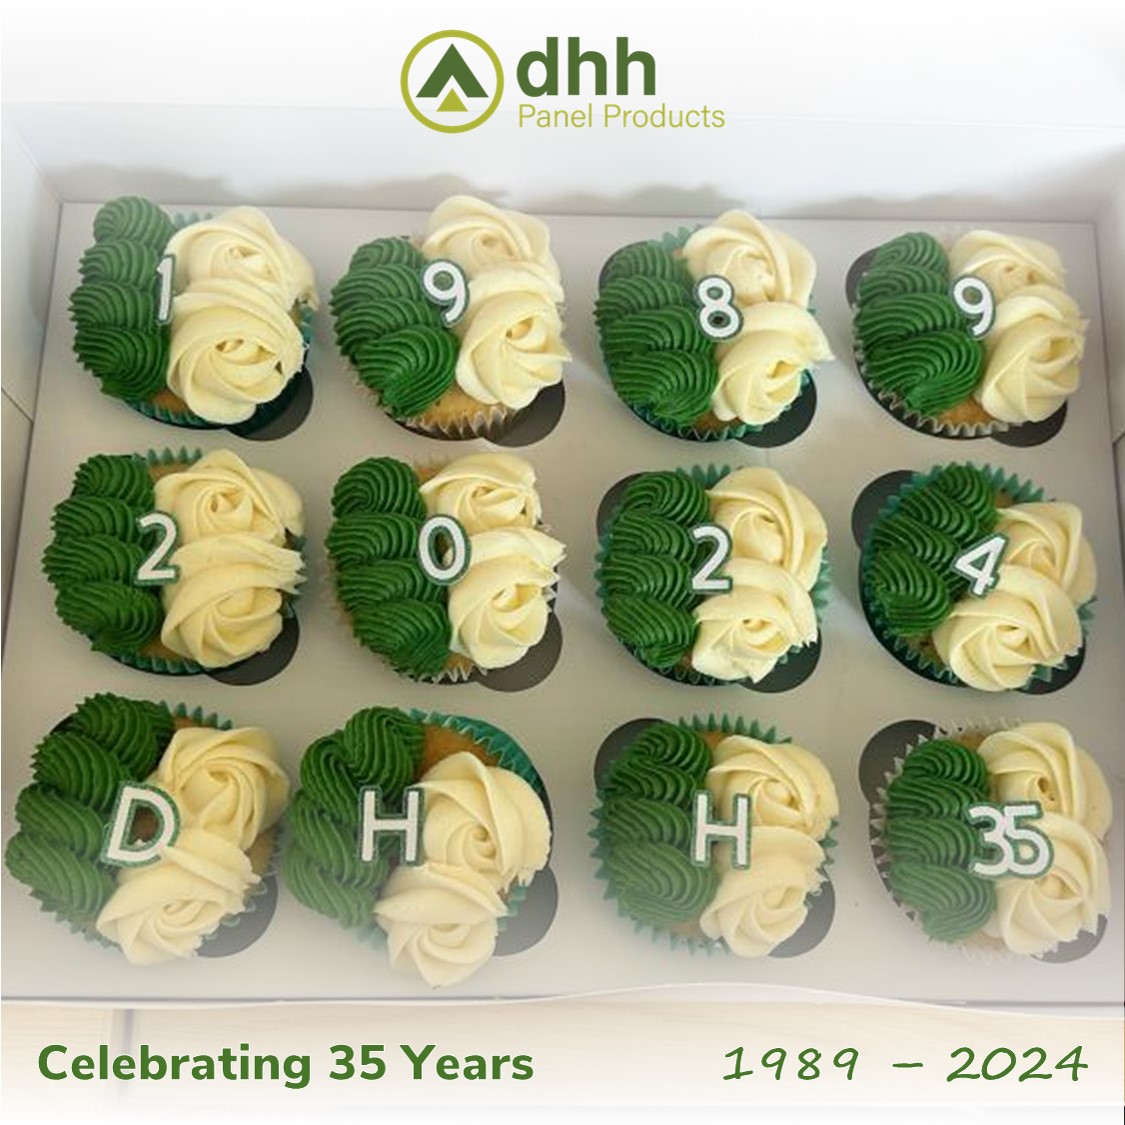 Celebrations are underway at DHH, as we officially mark 35 years in the Timber Trade. Thank you to all our customers, suppliers and staff for your continued support – and here’s to another 35 more!
  
#35years #DhhPanelProducts #TimberTrade #SafeAndLegalChoice